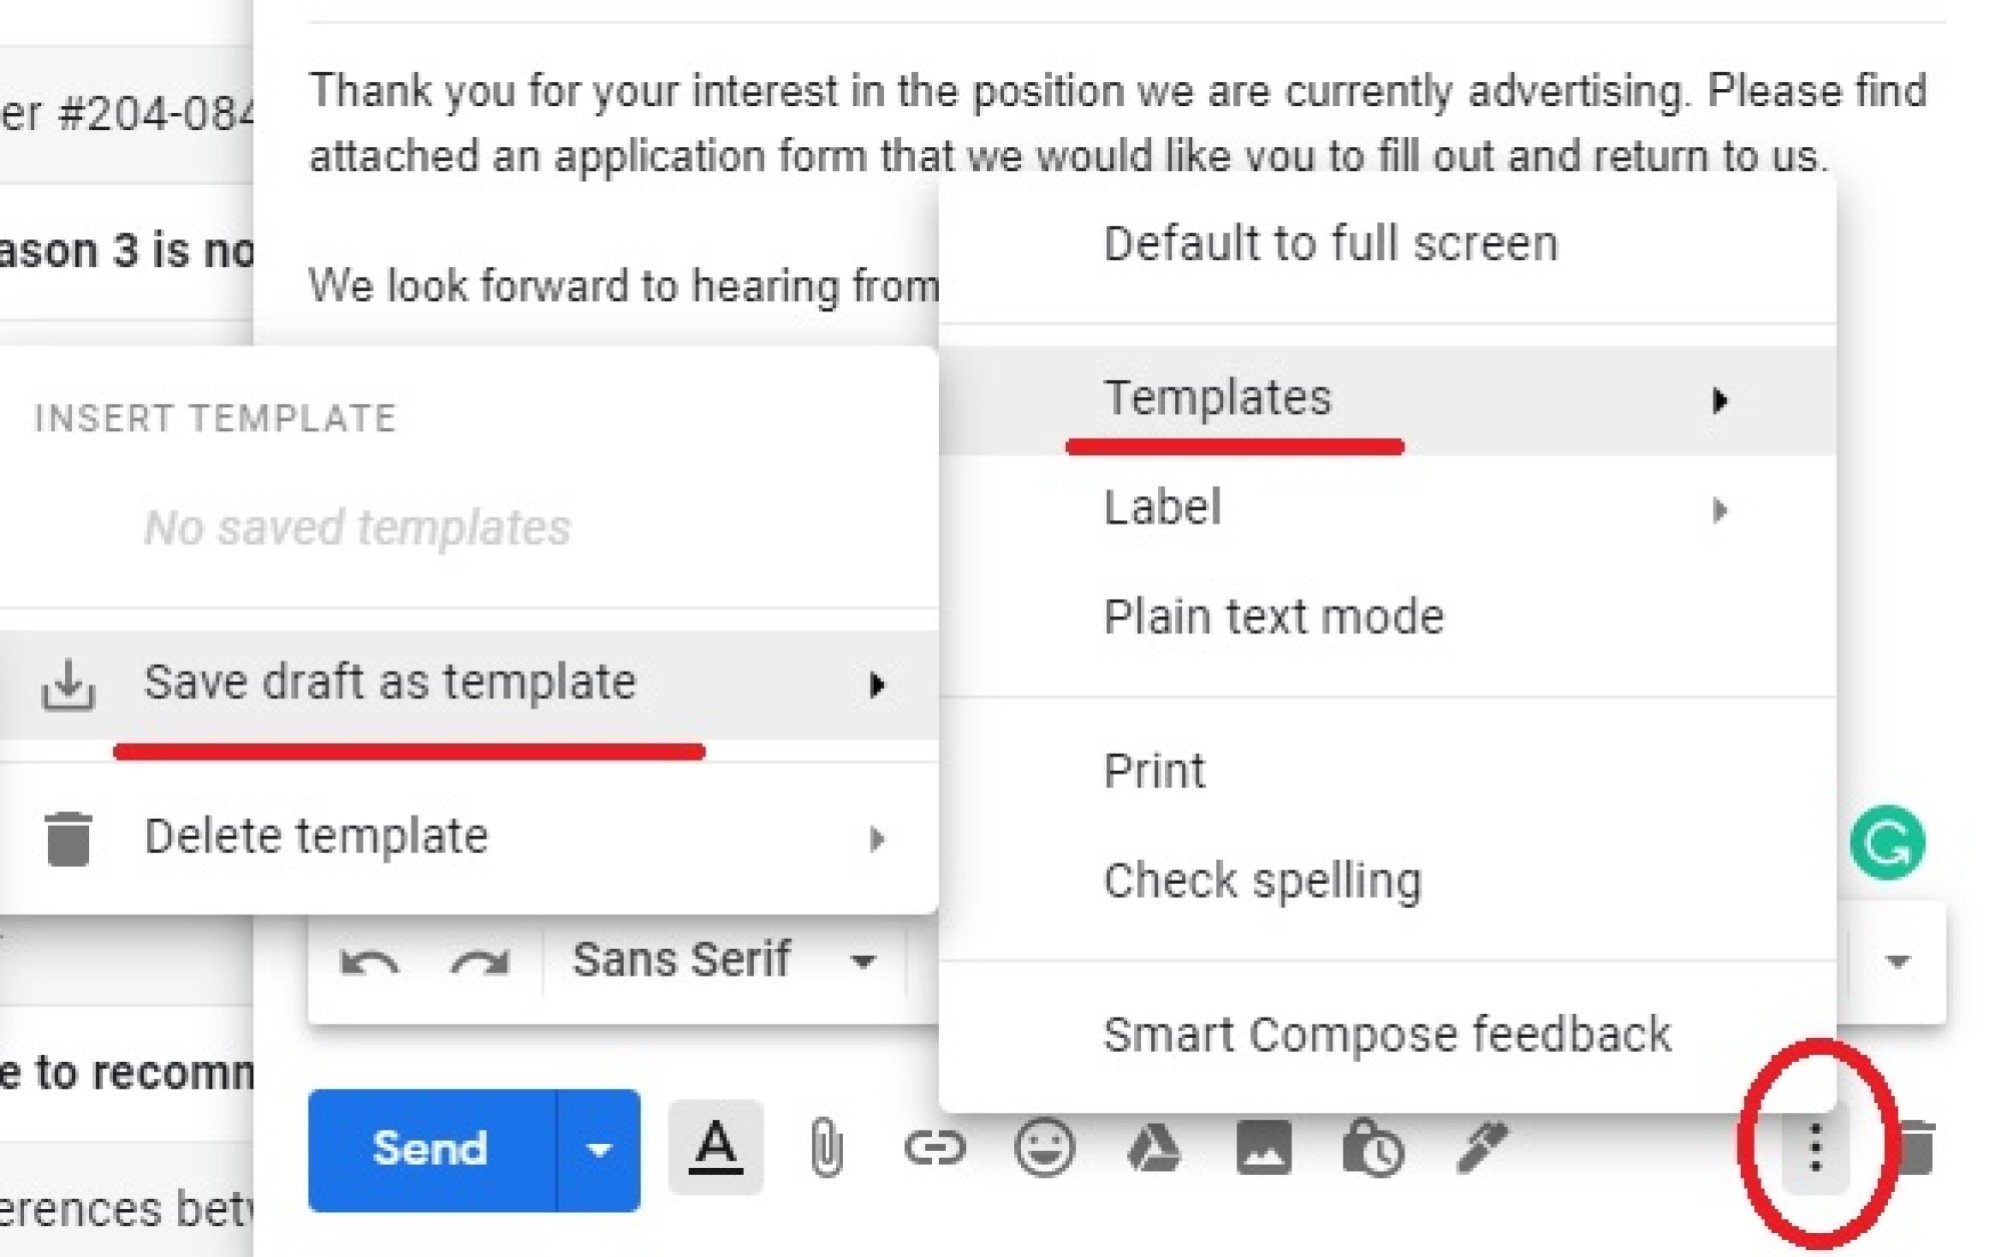 A Gmail screenshot with the "Save draft as template" option under "Templates" highlighted. 